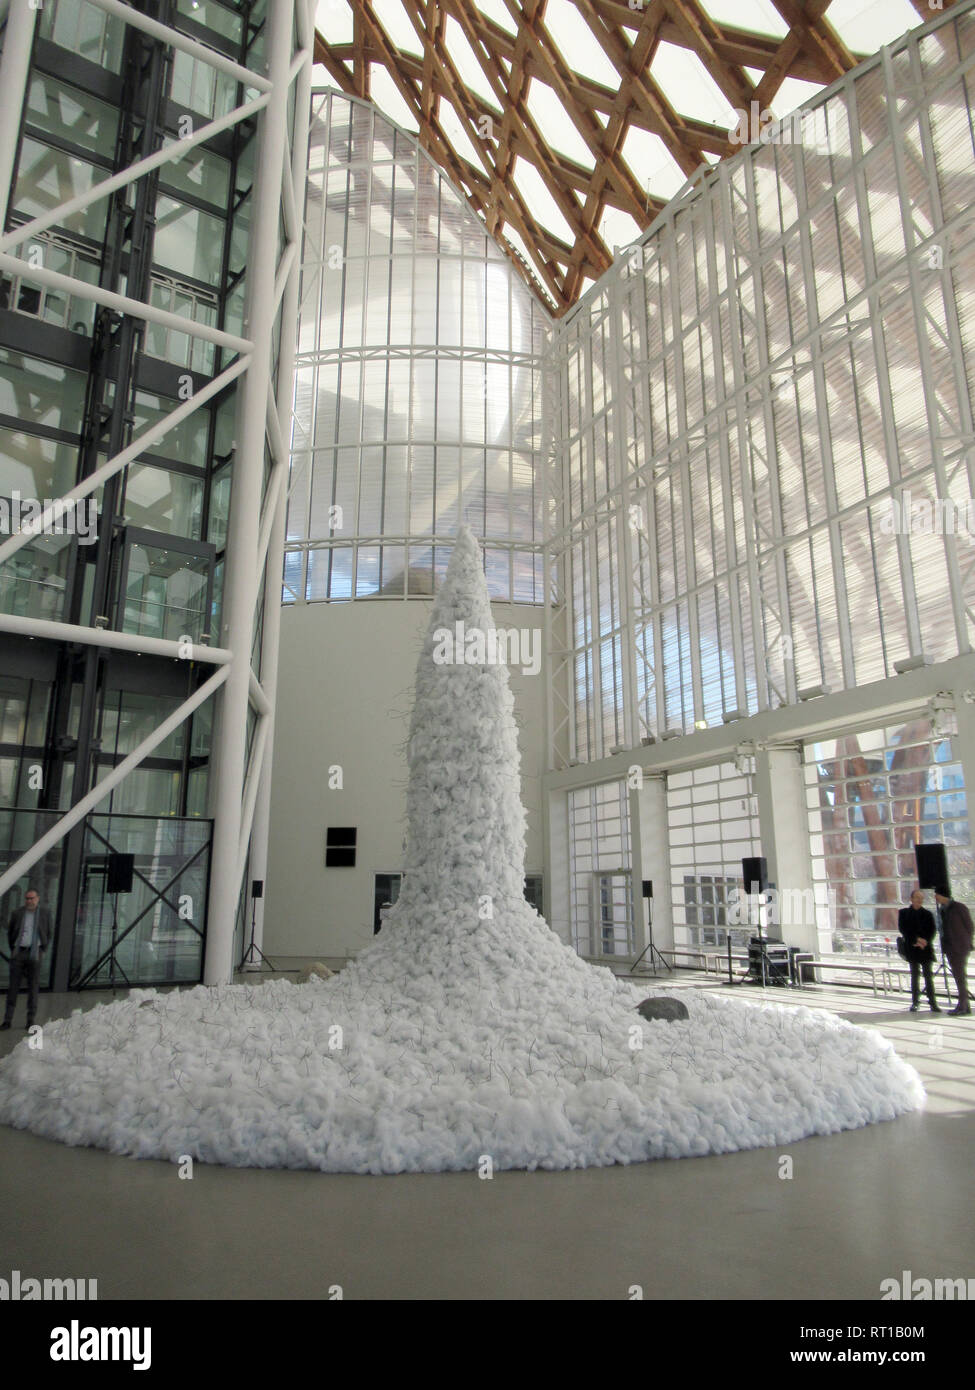 26 February 2019, France (France), Metz: The installation 'Relatum - Cotton Tower' by Lee Ufan in the exhibition 'Habiter le temps' at the Centre Pompidou. Ufan, who studied philosophy in Japan after completing his art degree, uses his art to seek a new arrangement of already existing things by relating them to the surrounding space. (to dpa 'Metz dedicates star artist Lee Ufan retrospective: The art of silence' from 27.02.2019) Photo: Sabine Glaubitz/dpa Stock Photo